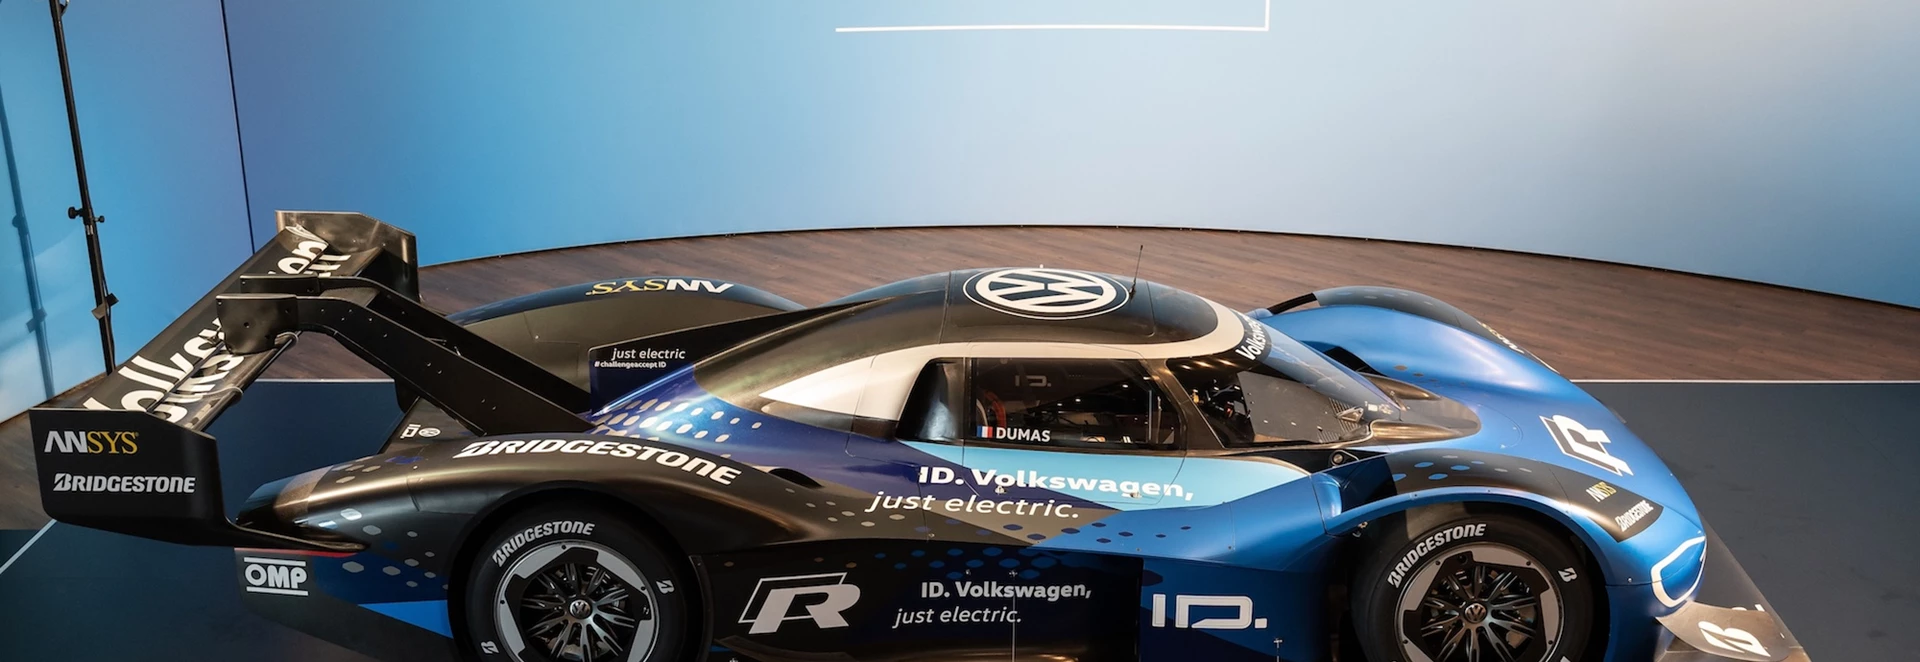 Could this be the car to smash the Nurburgring electric vehicle lap record? 